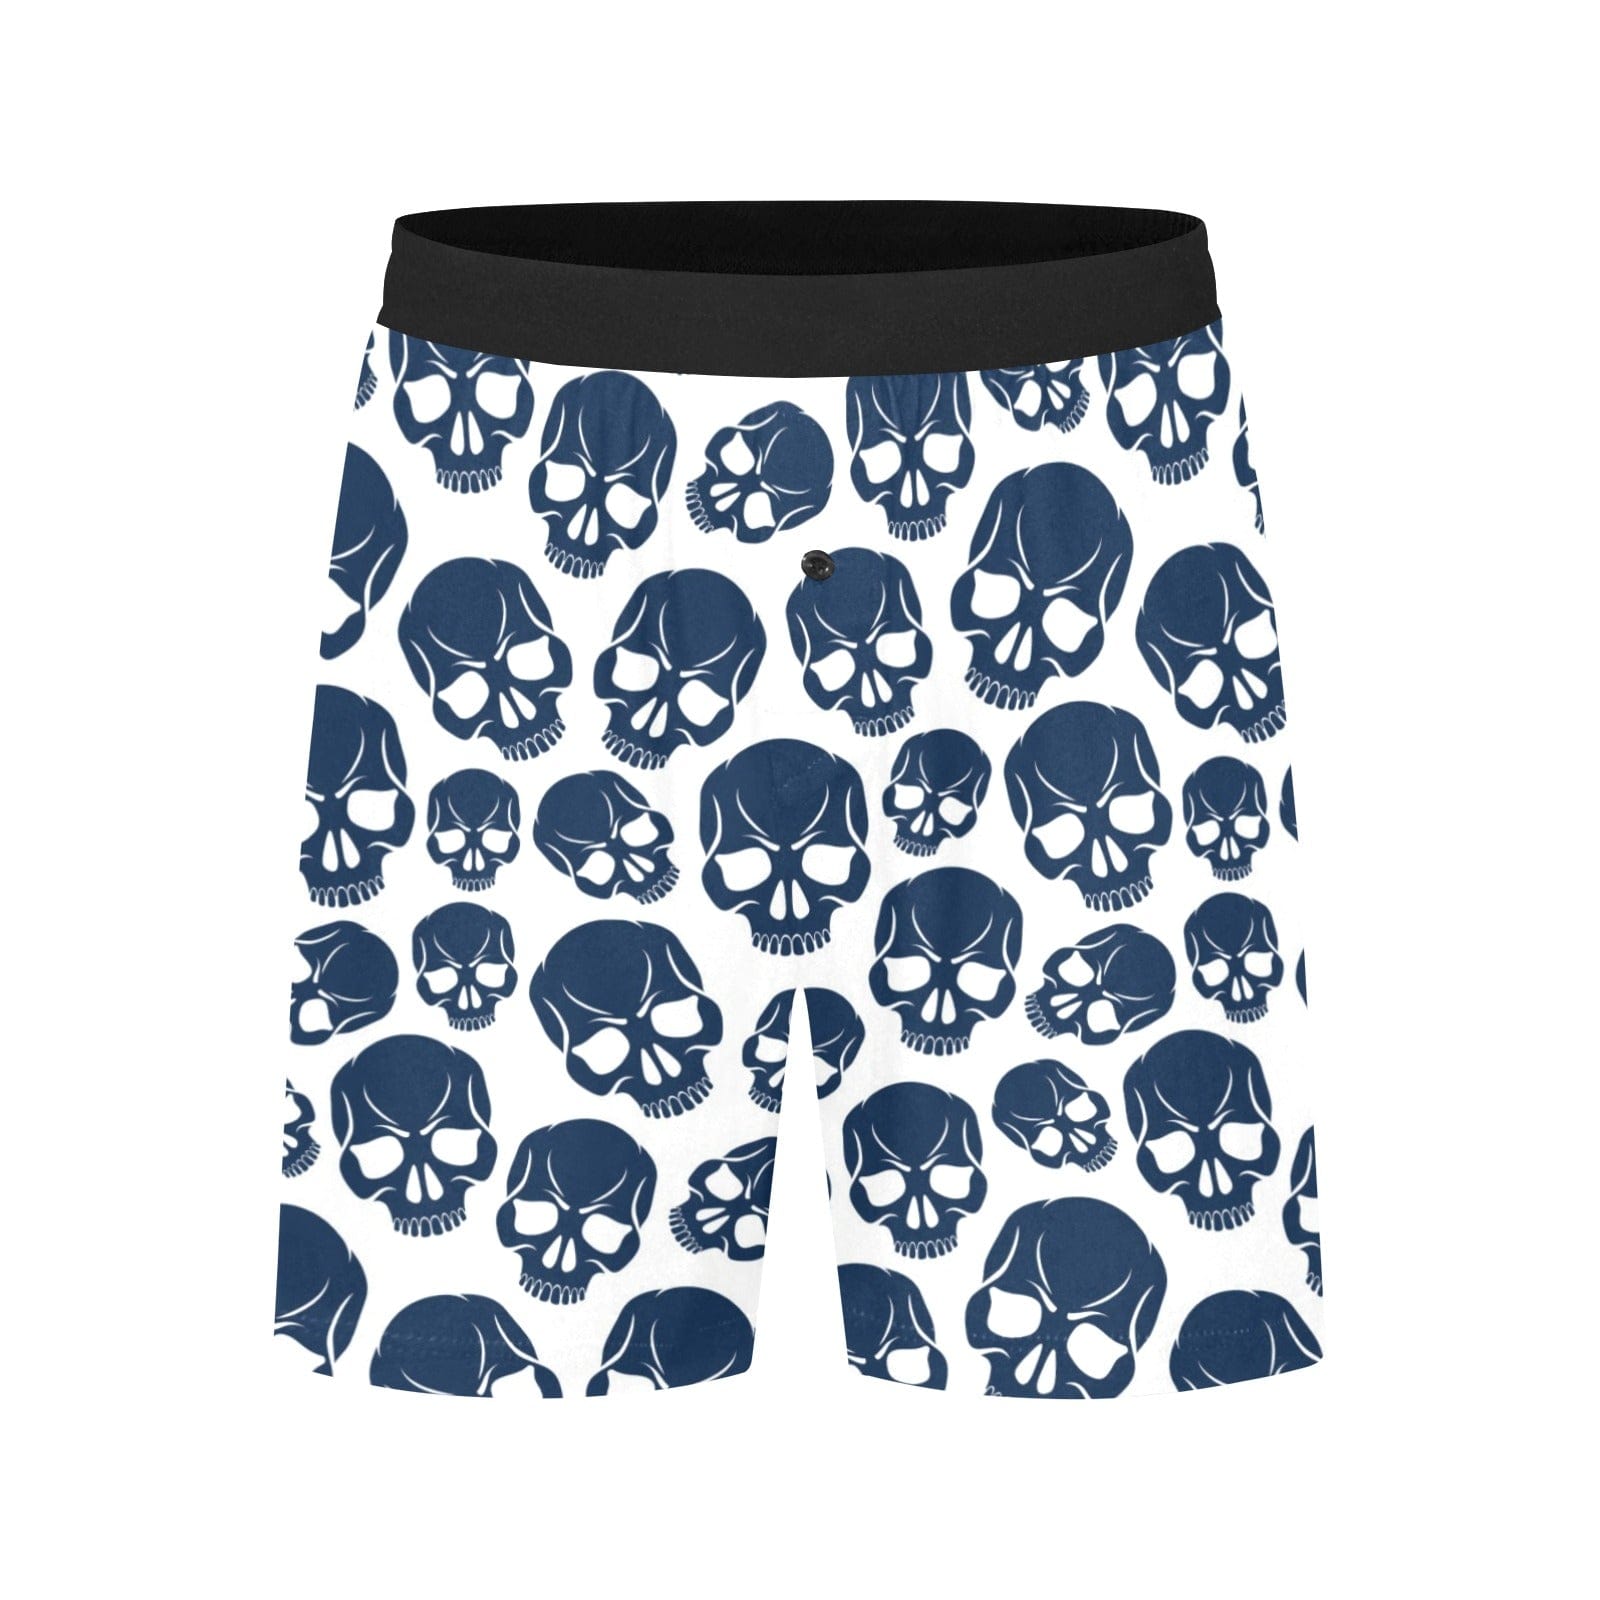 Men's Skull Print Mid-Length Pajama Shorts Are The Perfect Way to Stay Cool & Comfortable